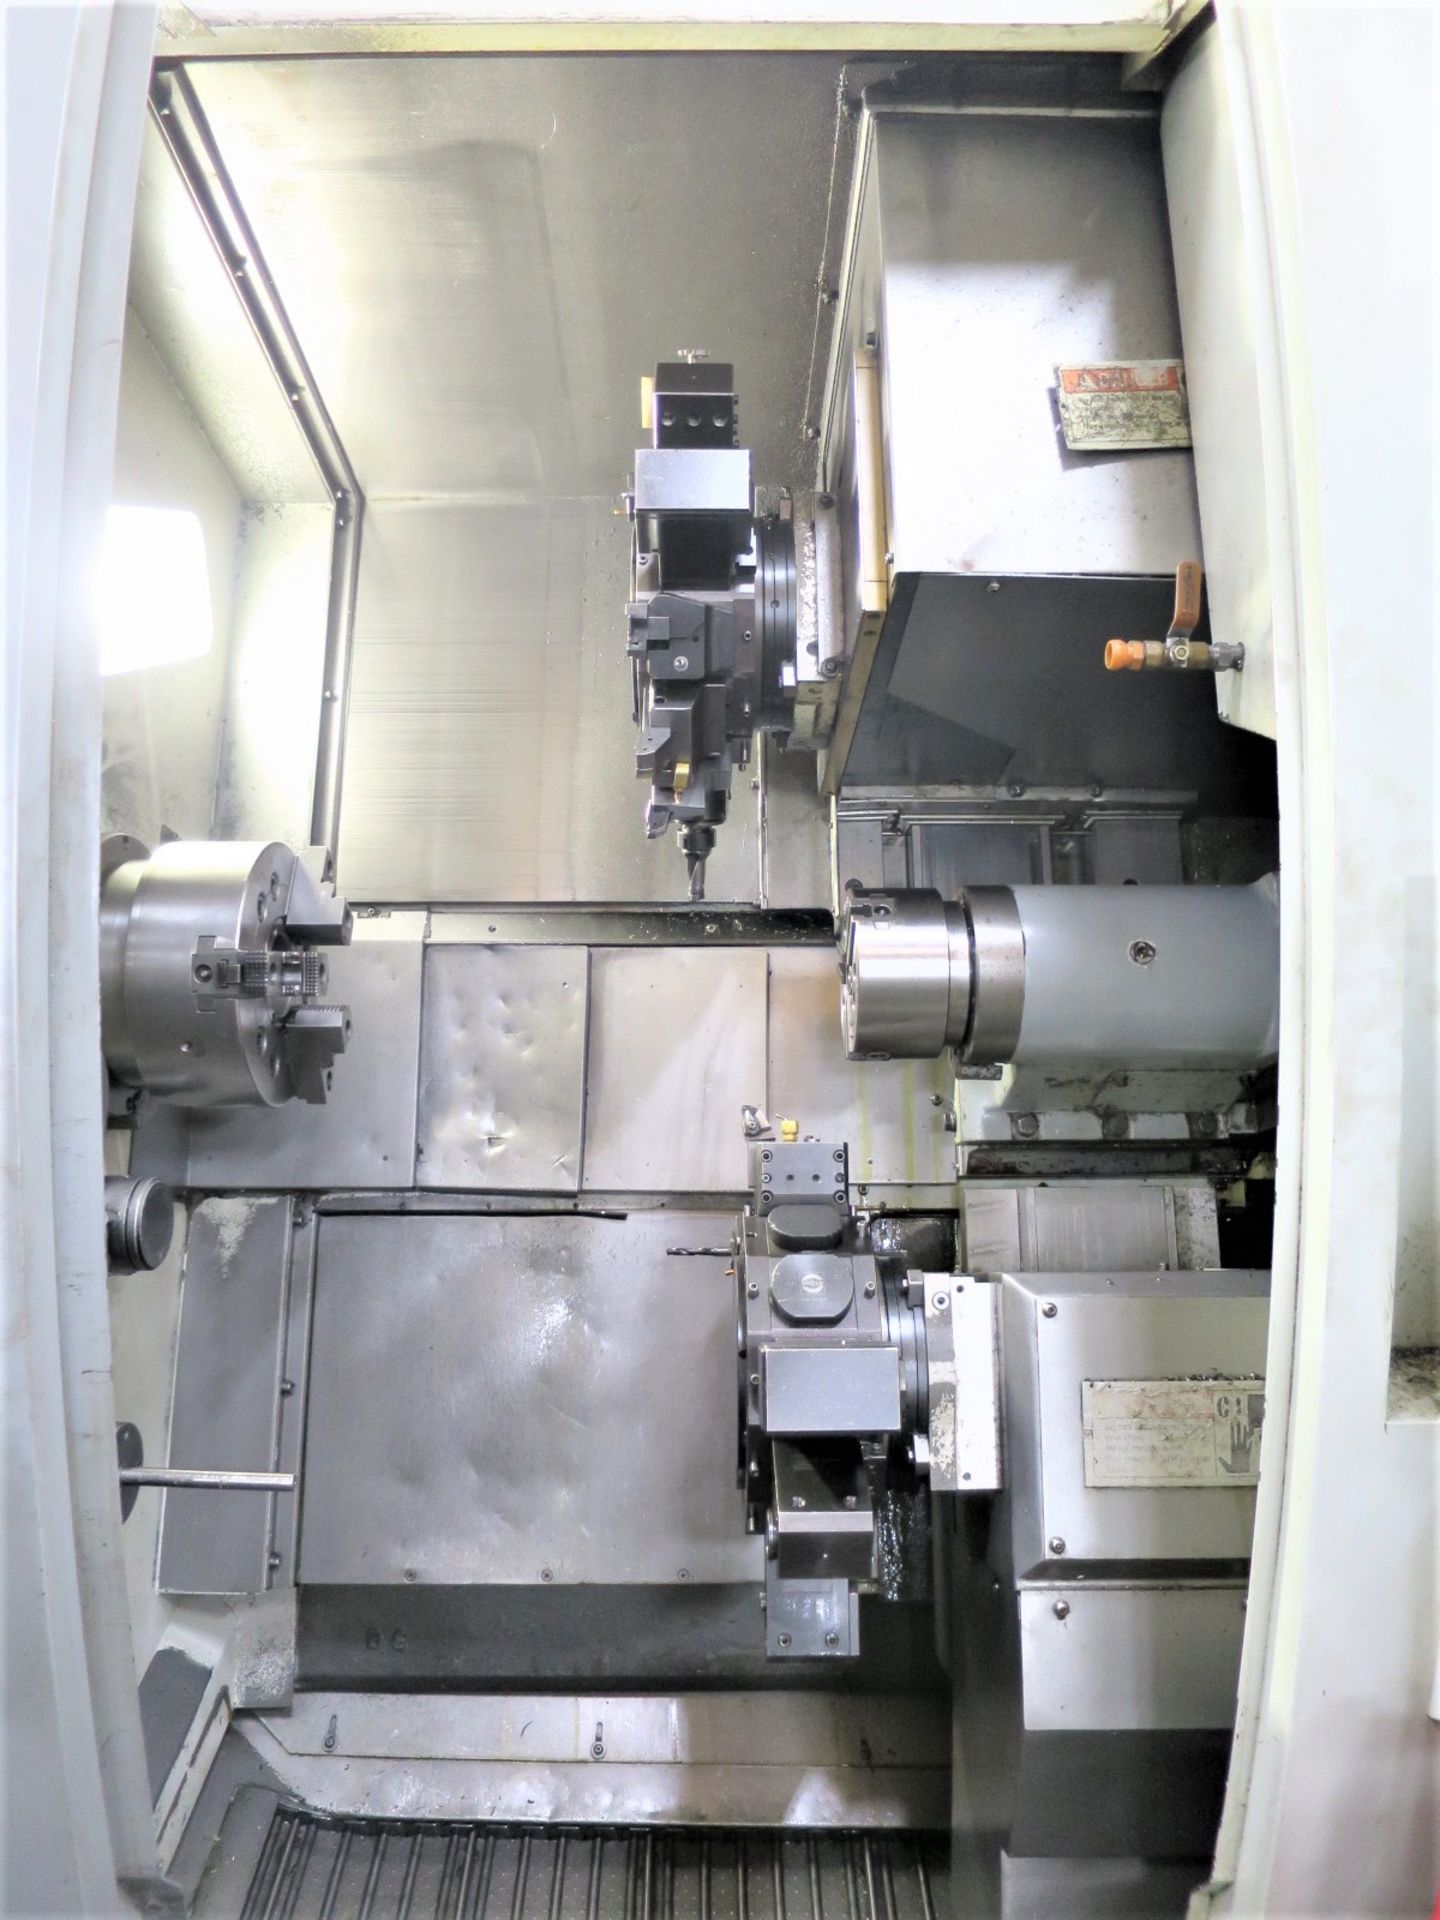 Doosan Z290-SMY Twin Spindle, Twin Turret CNC Lathe W/Milling & Y-Axis, S/N 2290-SMY, New 2006 - Image 4 of 11